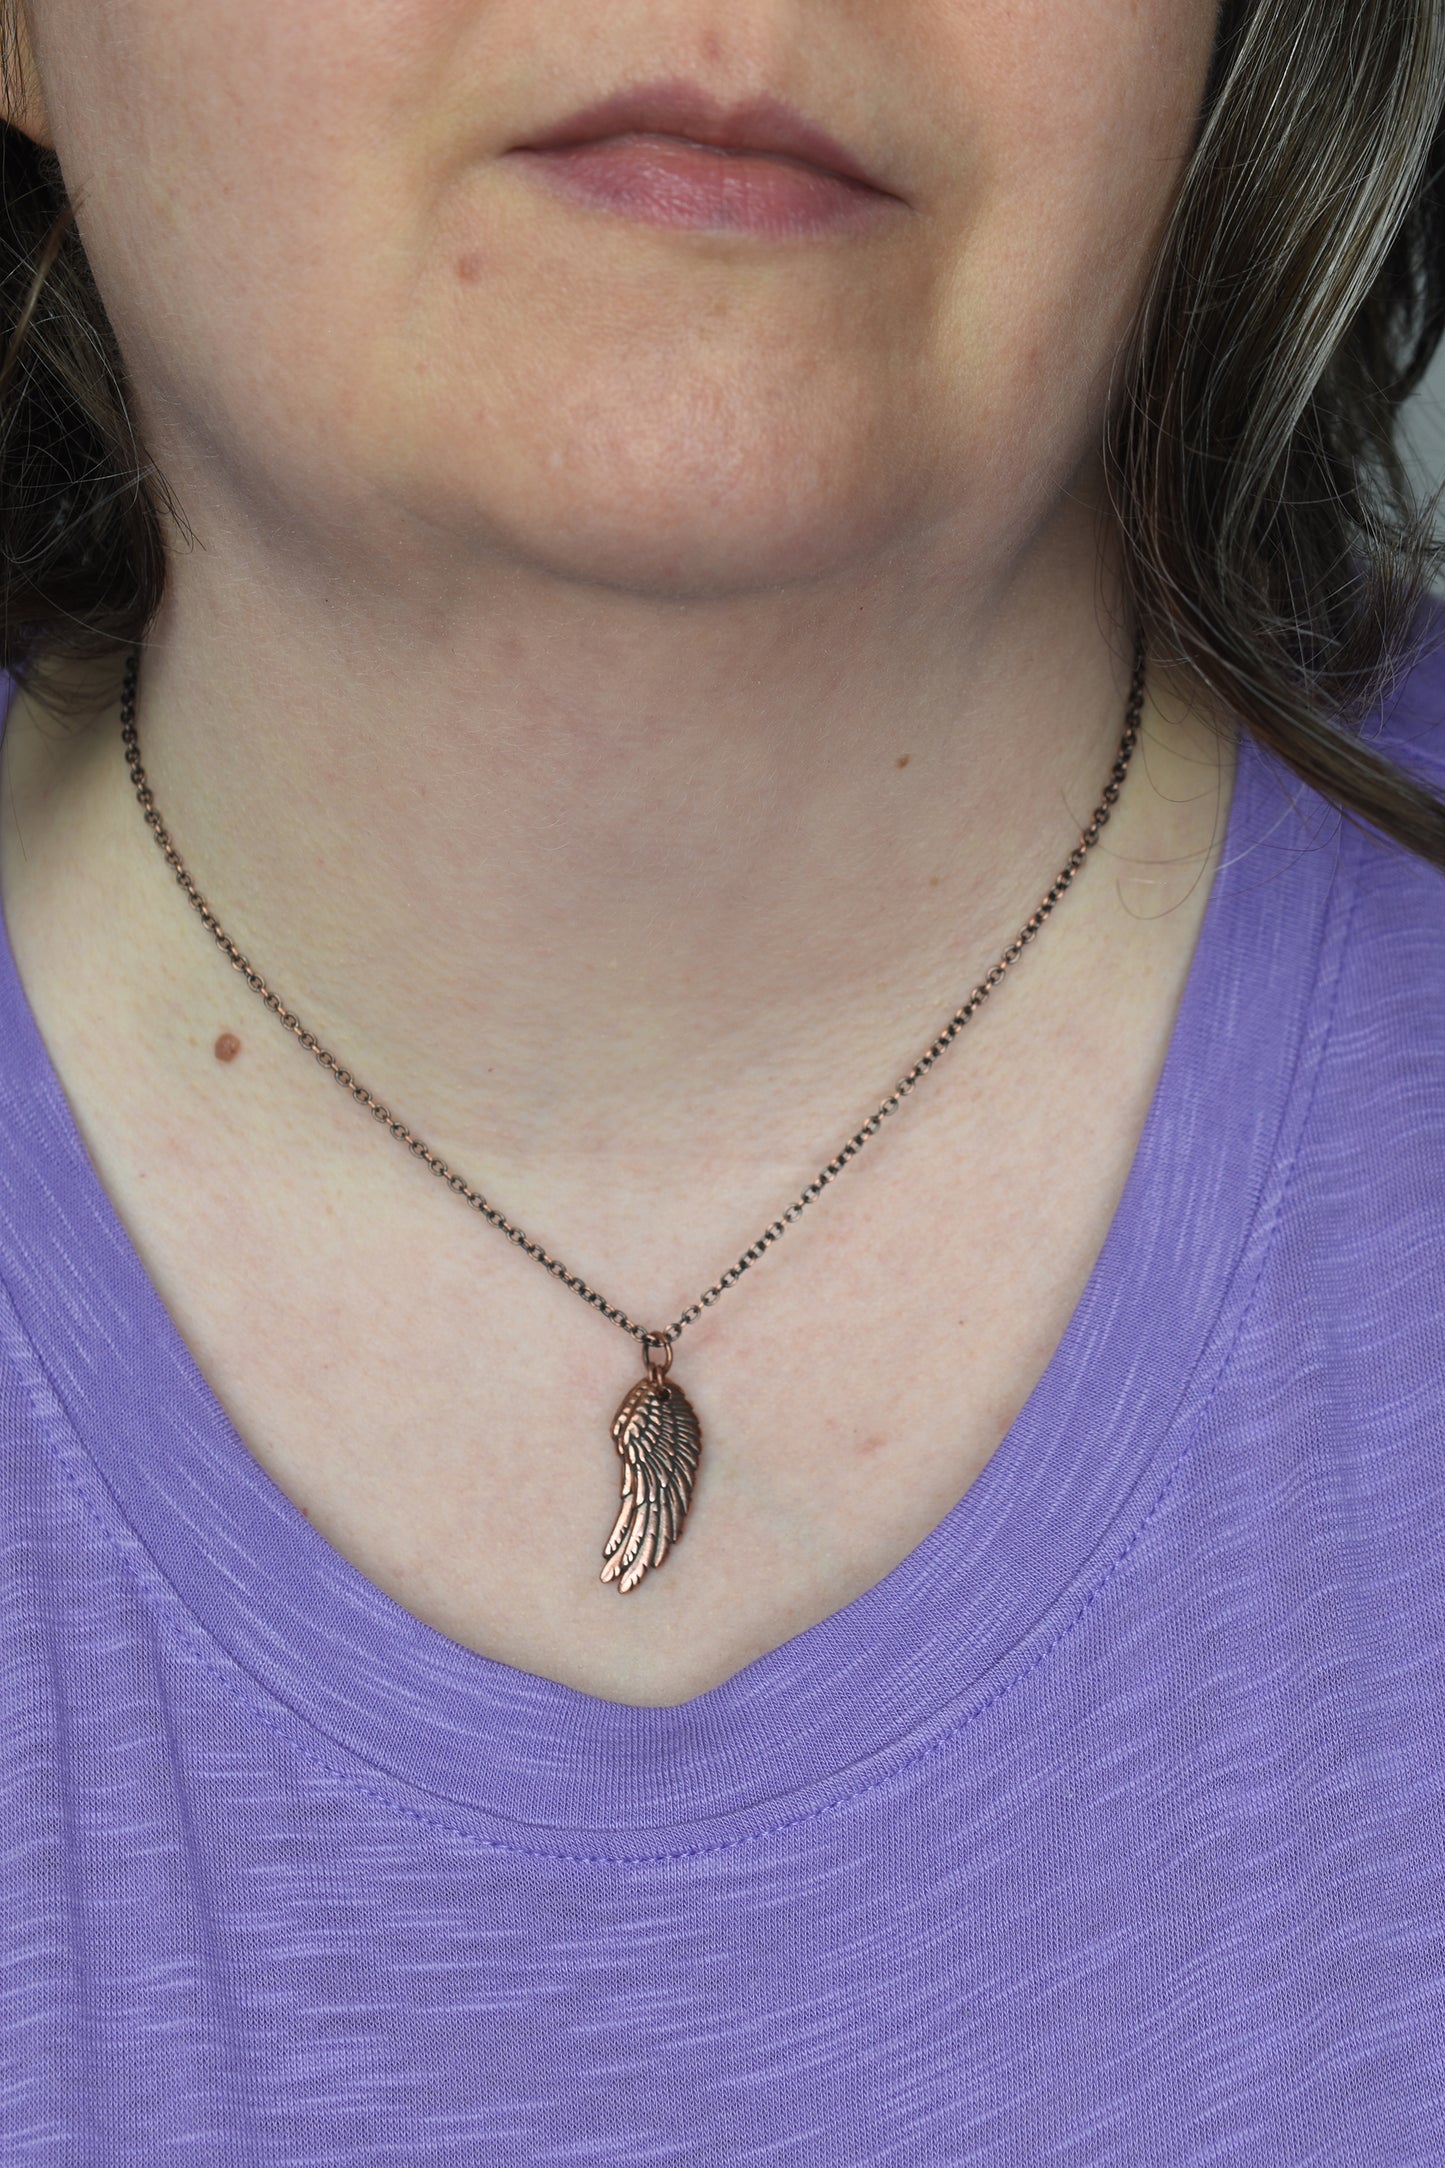 Wings Necklace in Antique Copper